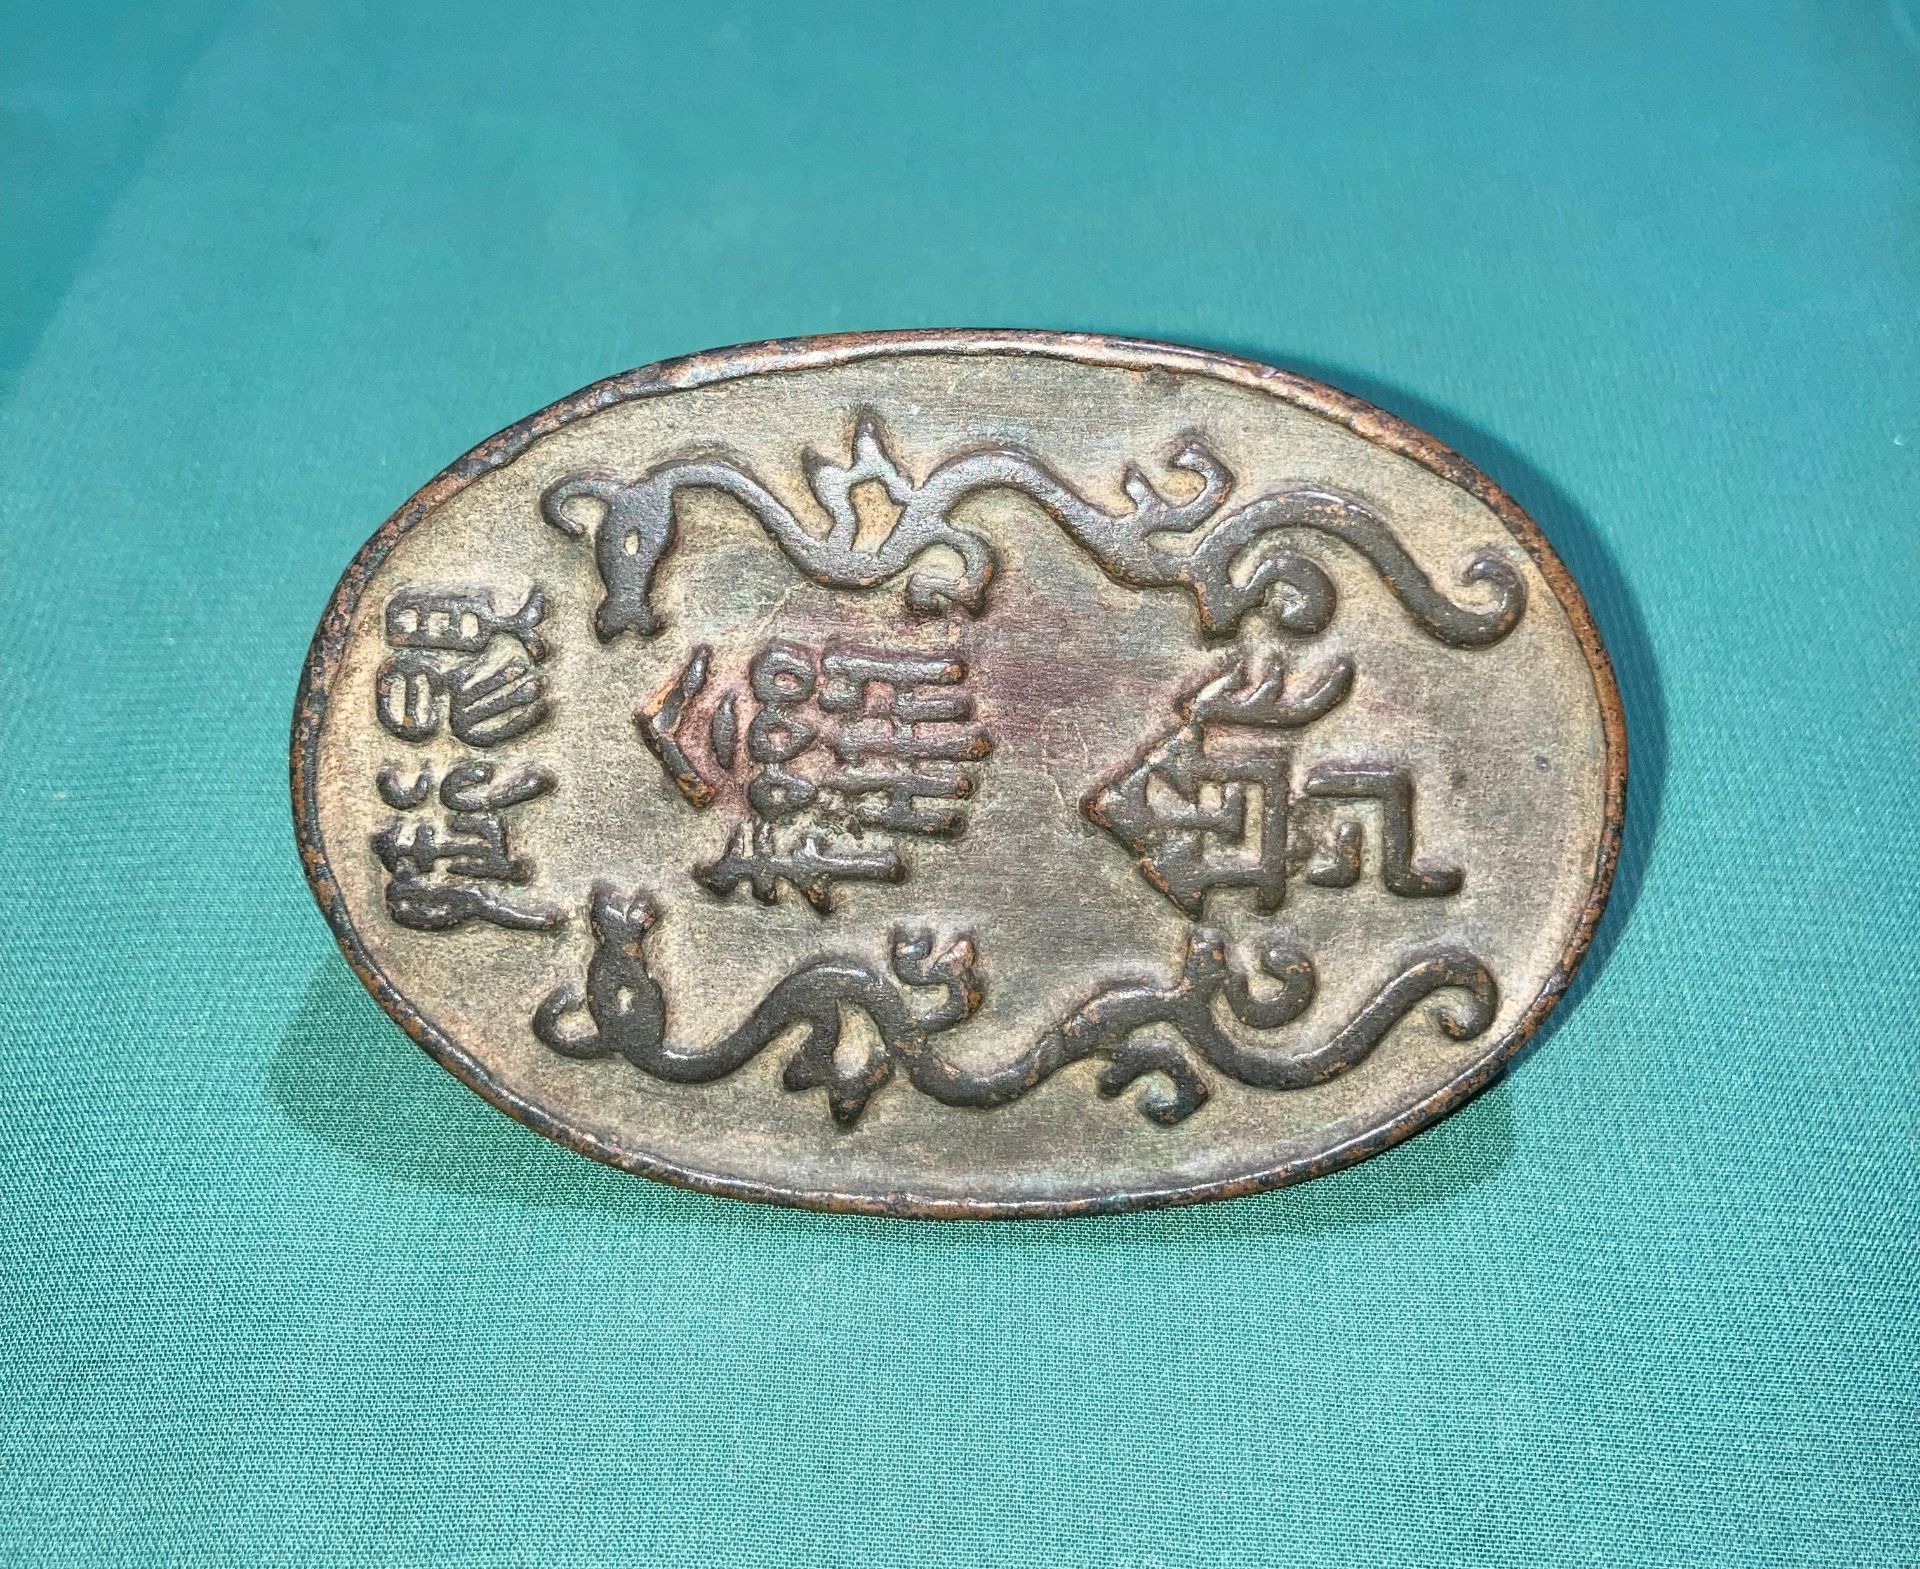 An antique oval bronze Oriental stamp/wax seal with engraved writing to top and dragons to base, 8.